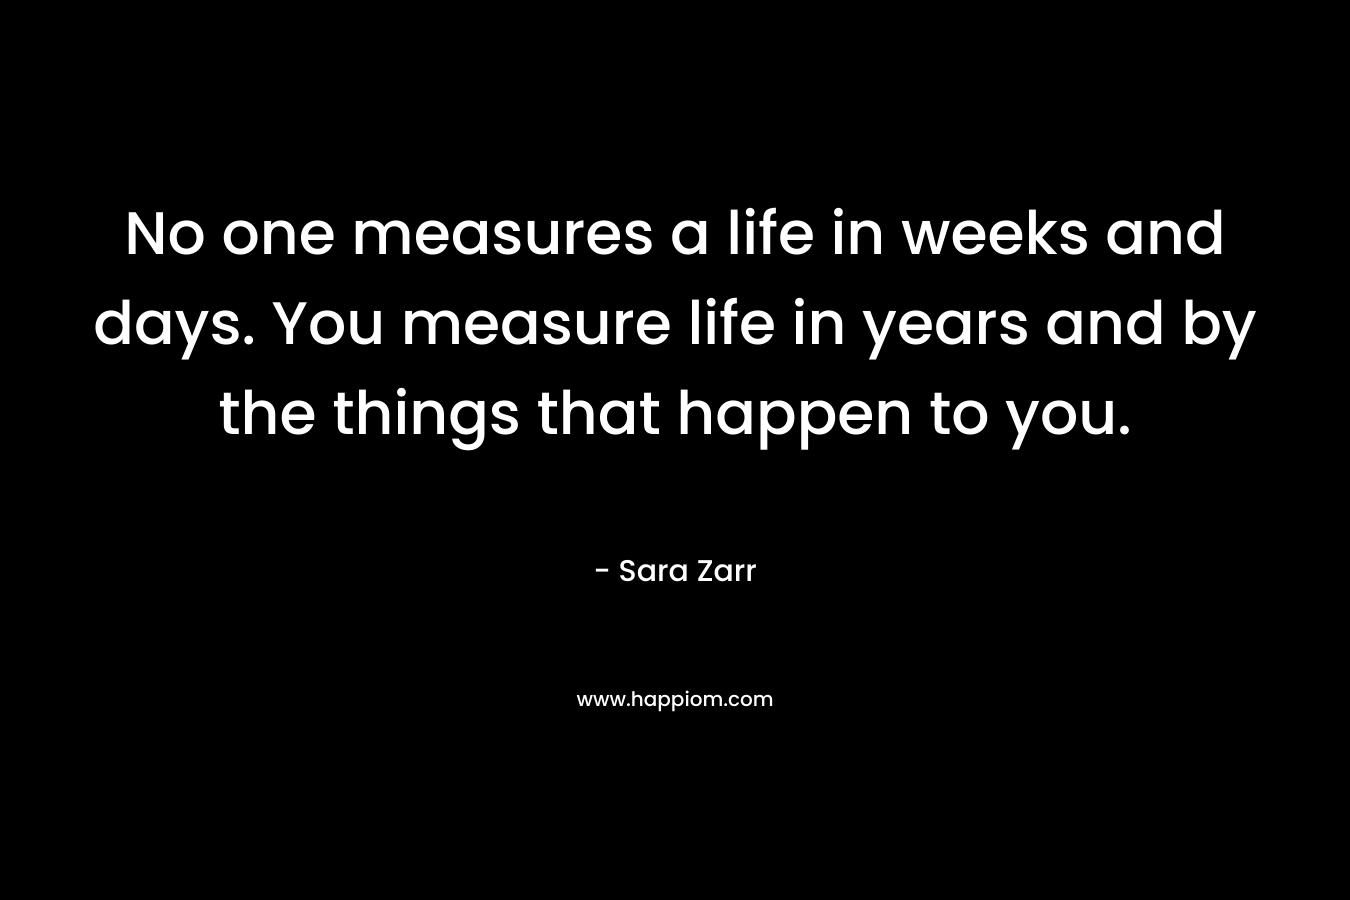 No one measures a life in weeks and days. You measure life in years and by the things that happen to you.